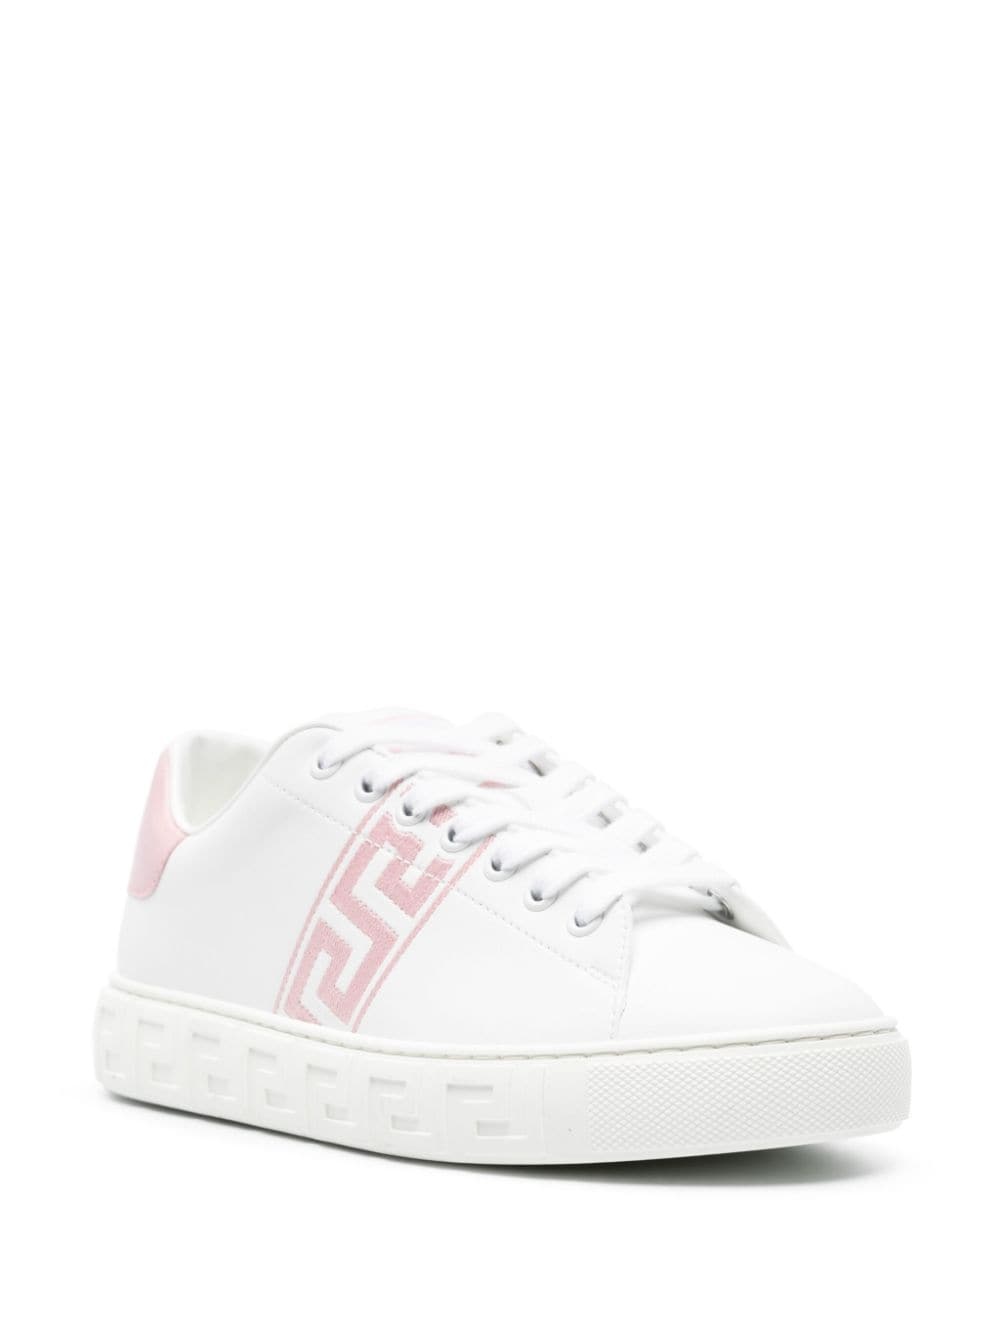 Greca-embroidered sneakers - 2